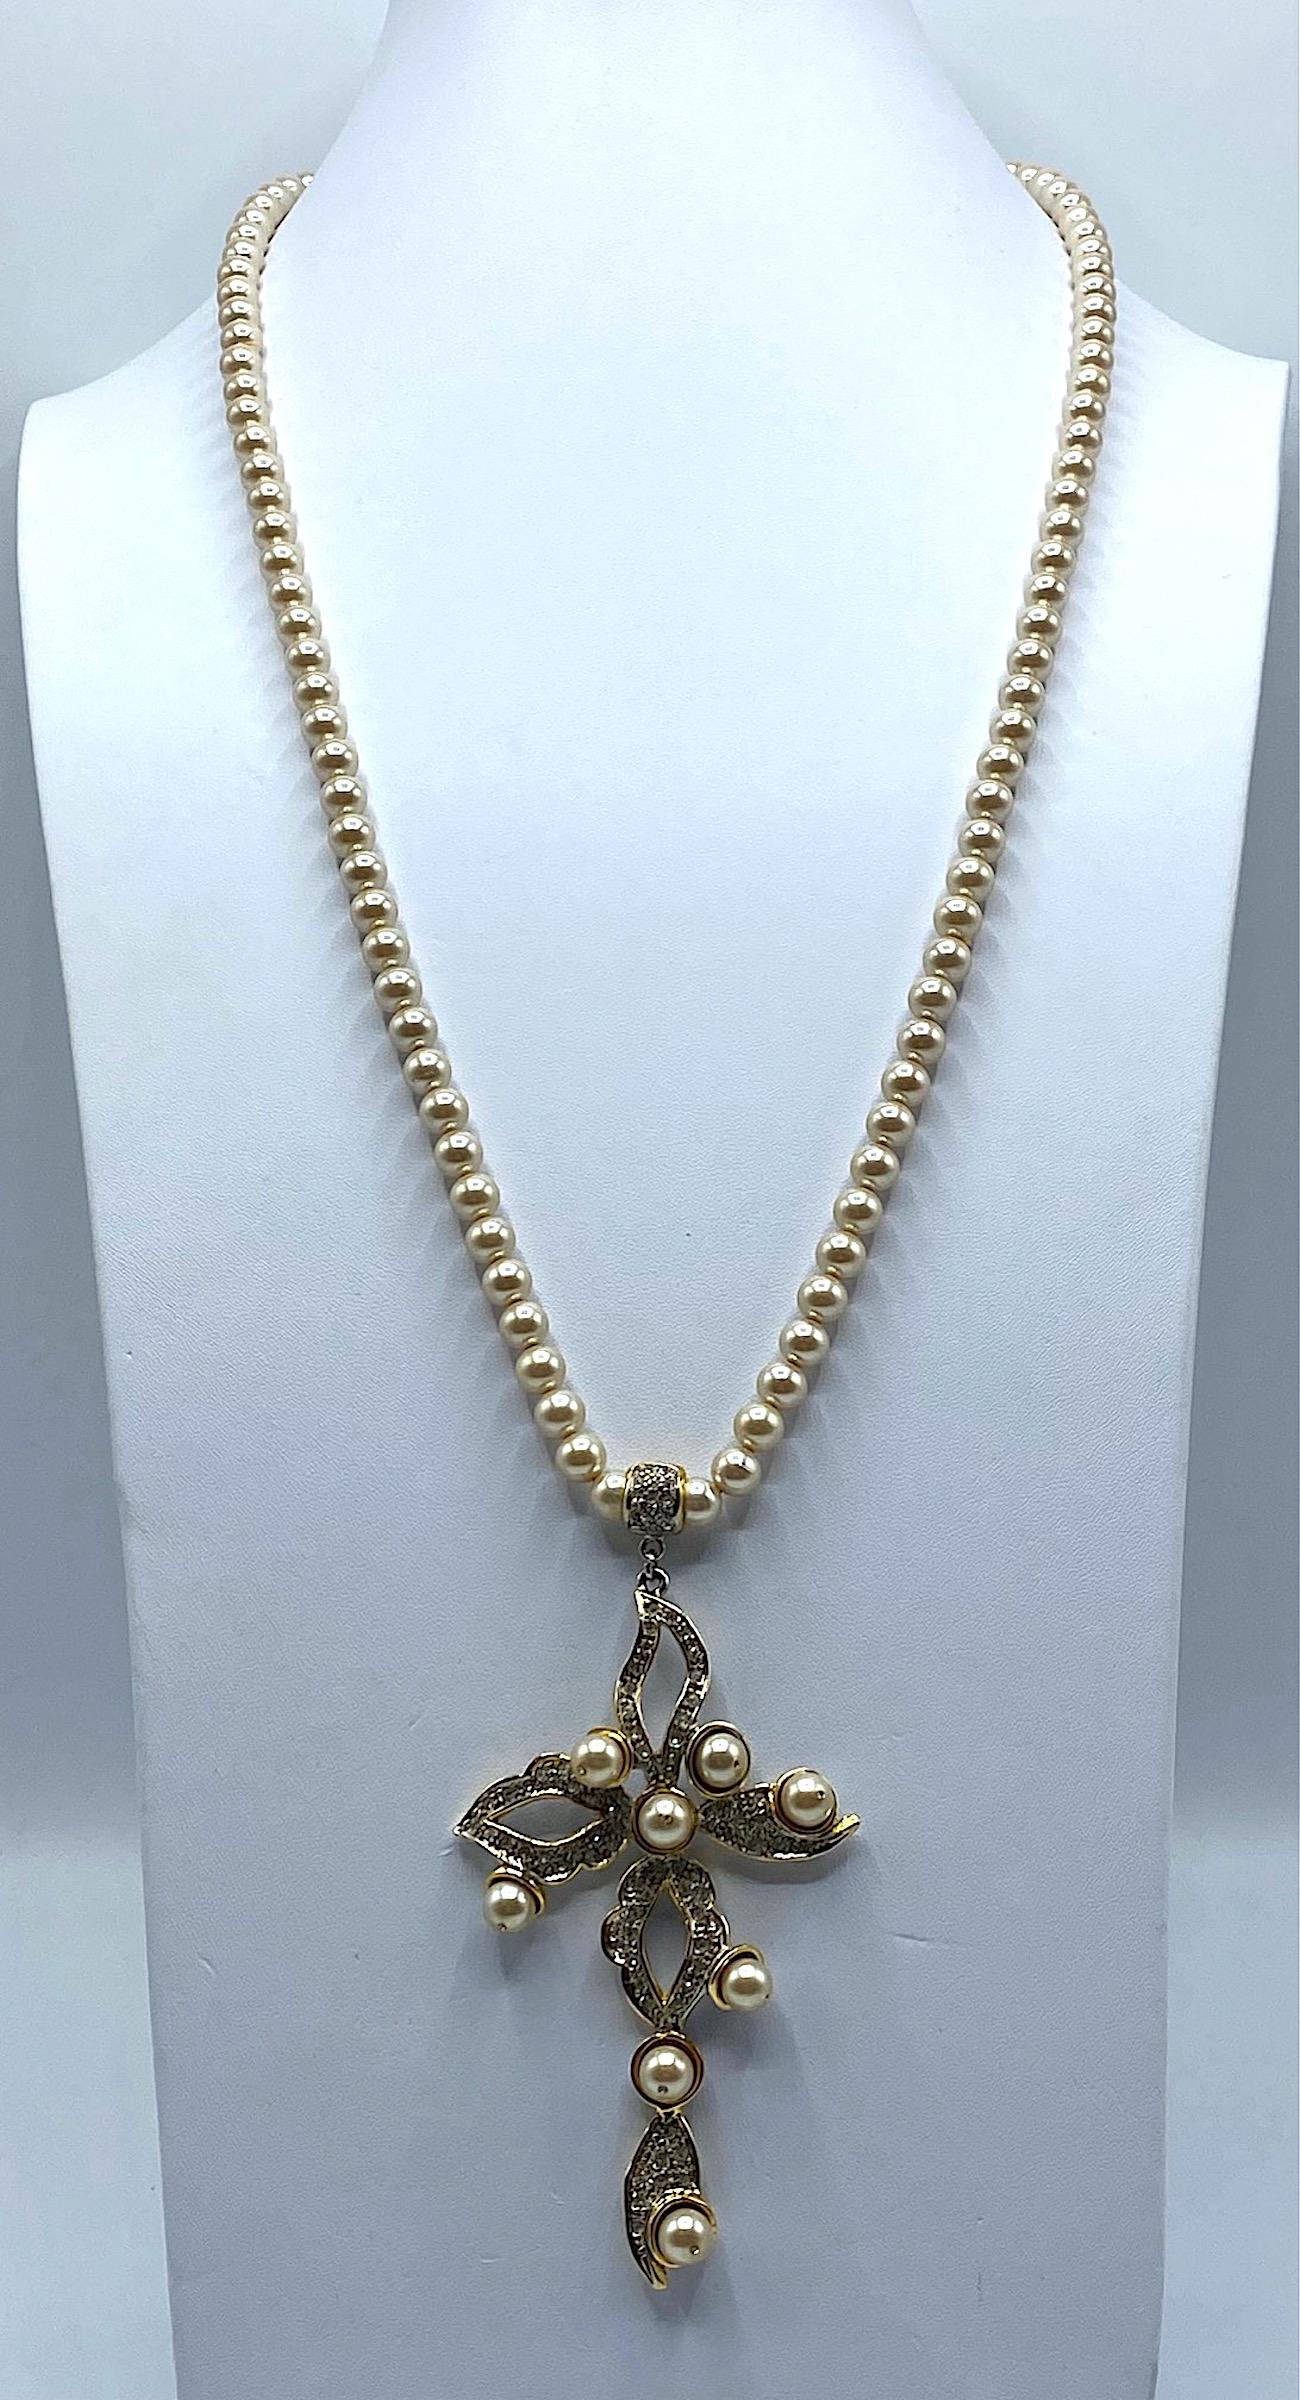 An amazing 1980s faux pearl cross pendant necklace from noted Italian jewelry designer Gianni De Liguoro. The pearls are 7 mm in diameter and the necklace is 31.5 inches long. The cross pendant is 2.38 inches wide and 4 inches long not including the